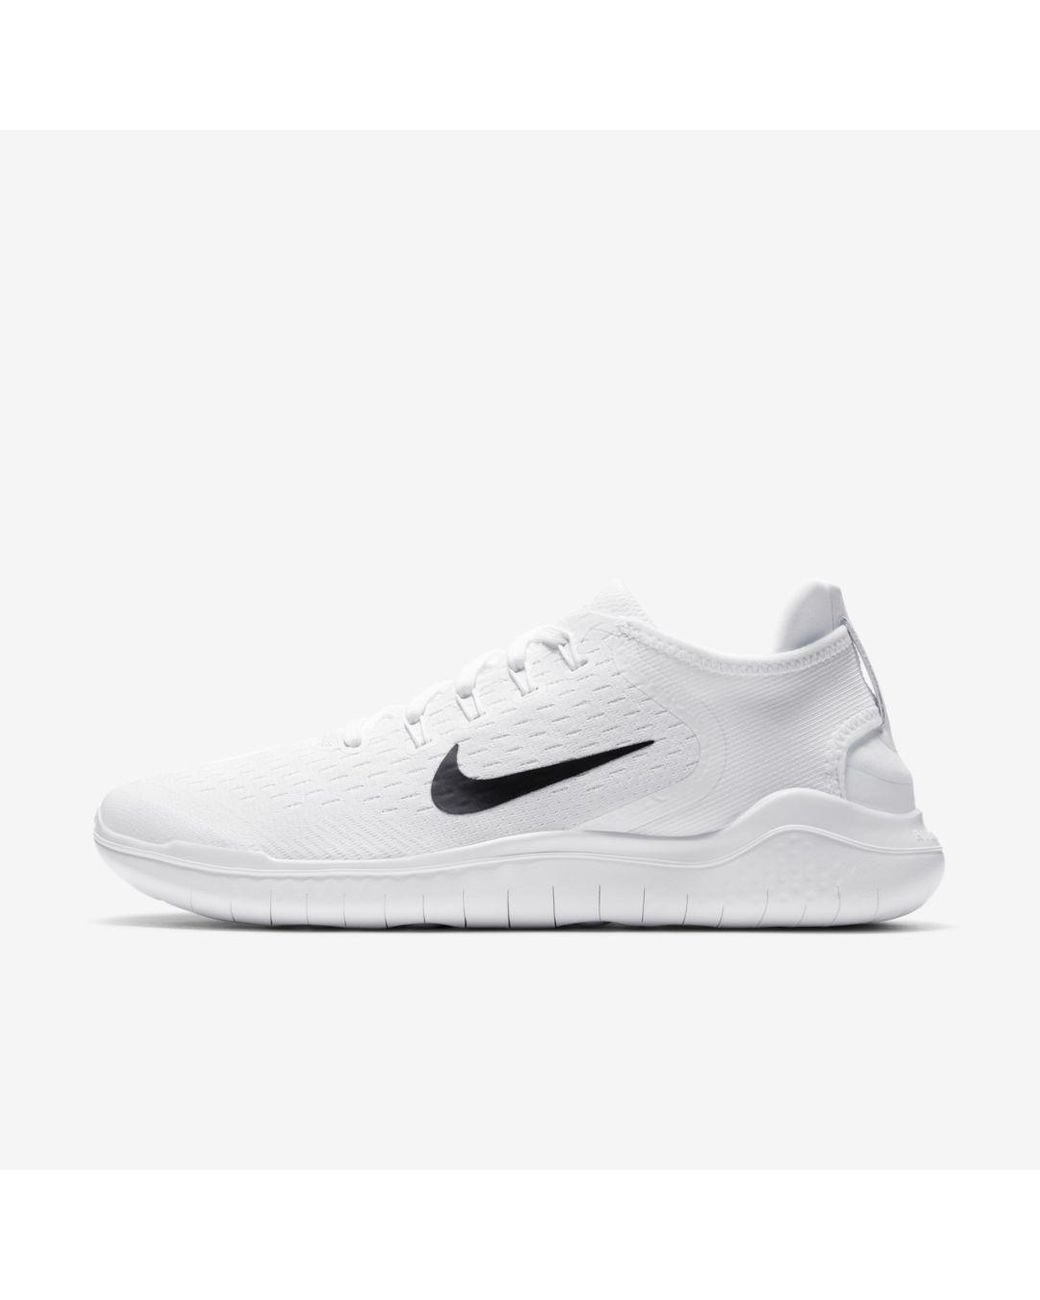 Nike Synthetic Free Rn 2018 in White,Black (White) for Men - Save 60% - Lyst